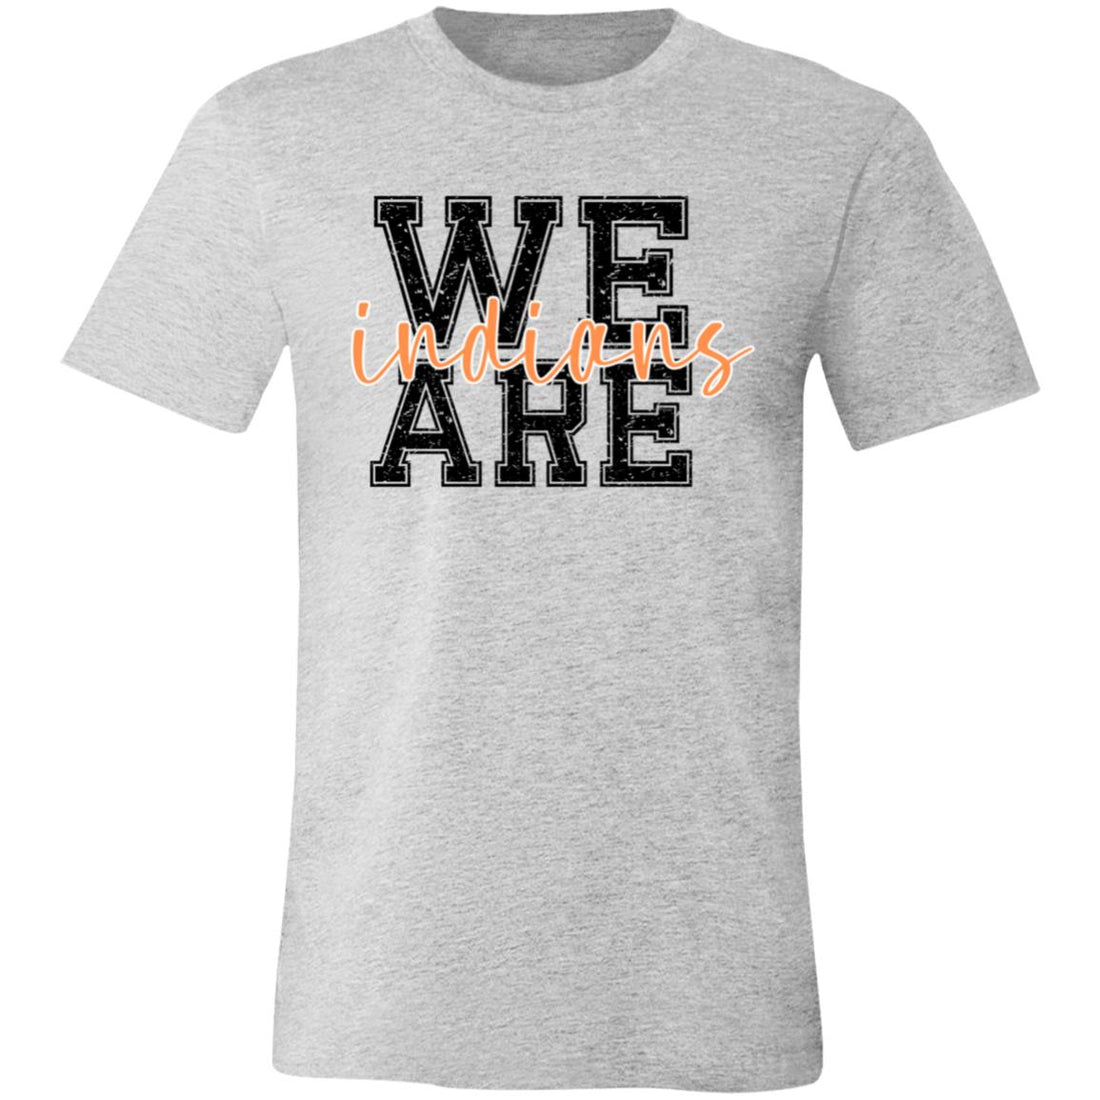 We Are Indians Unisex Jersey Short-Sleeve T-Shirt - T-Shirts - Positively Sassy - We Are Indians Unisex Jersey Short-Sleeve T-Shirt